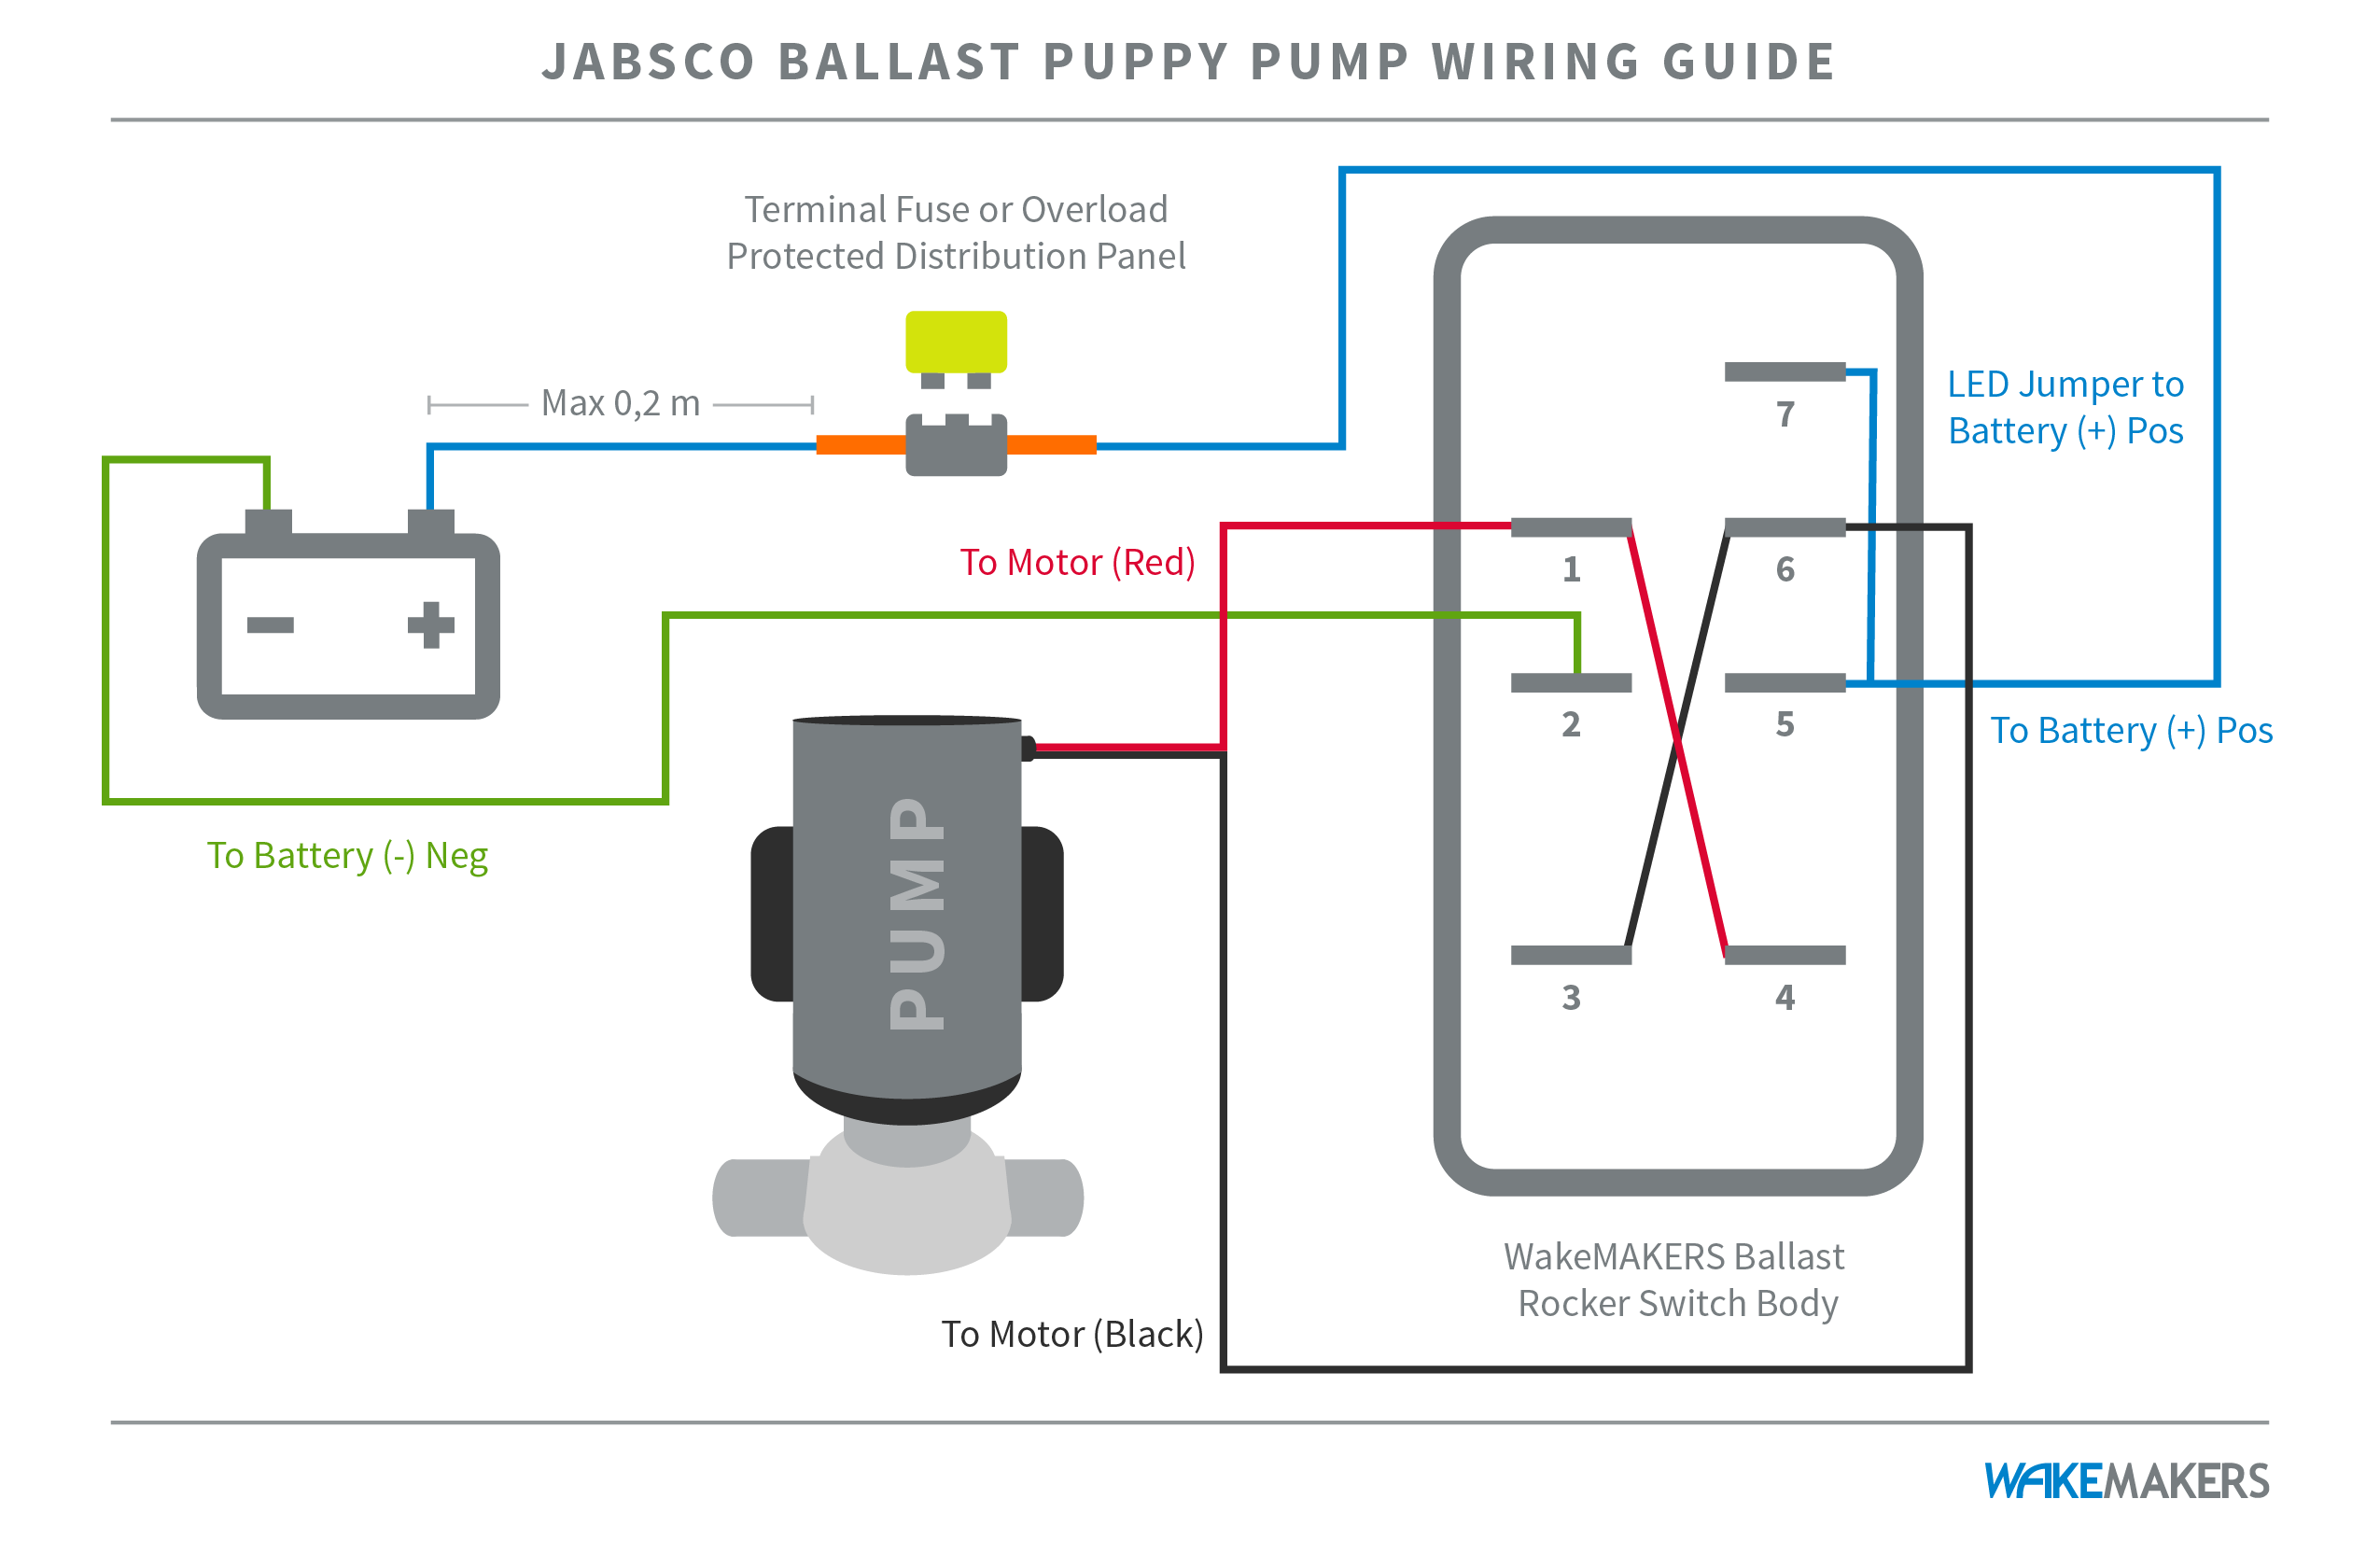 How to Wire a Jabsco Ballast Puppy